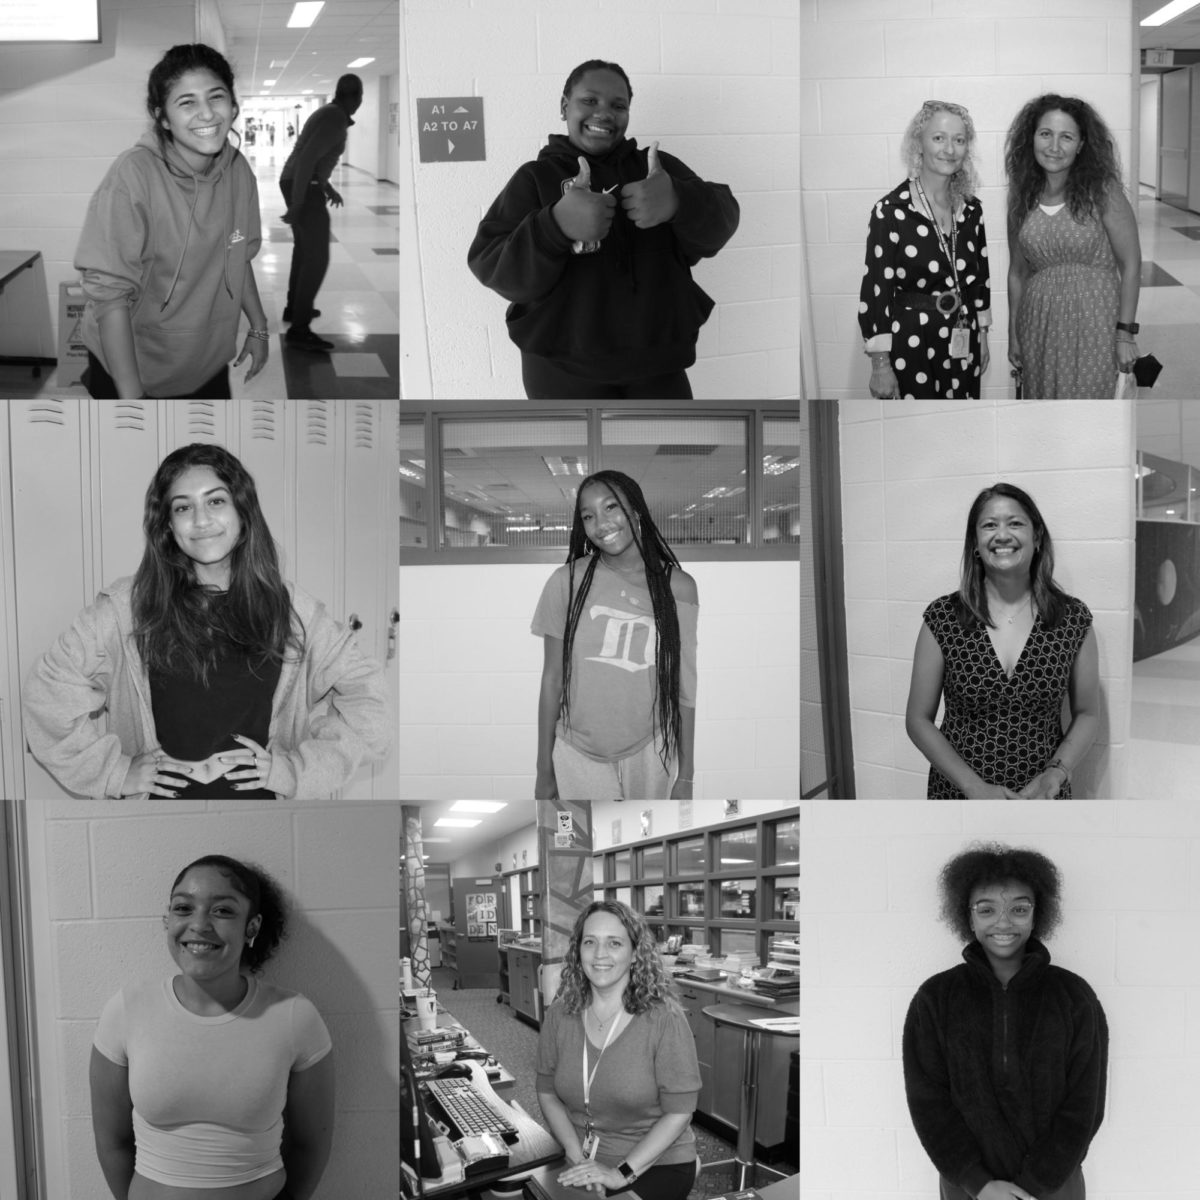 Sylvie Ball photographed a wide range of Groves attendants including staff, students and teachers around the school on Oct 4-5. The collage of photos is intended to highlight the diversity of the movie, and the Barbie tagline “You Can Be Anything.